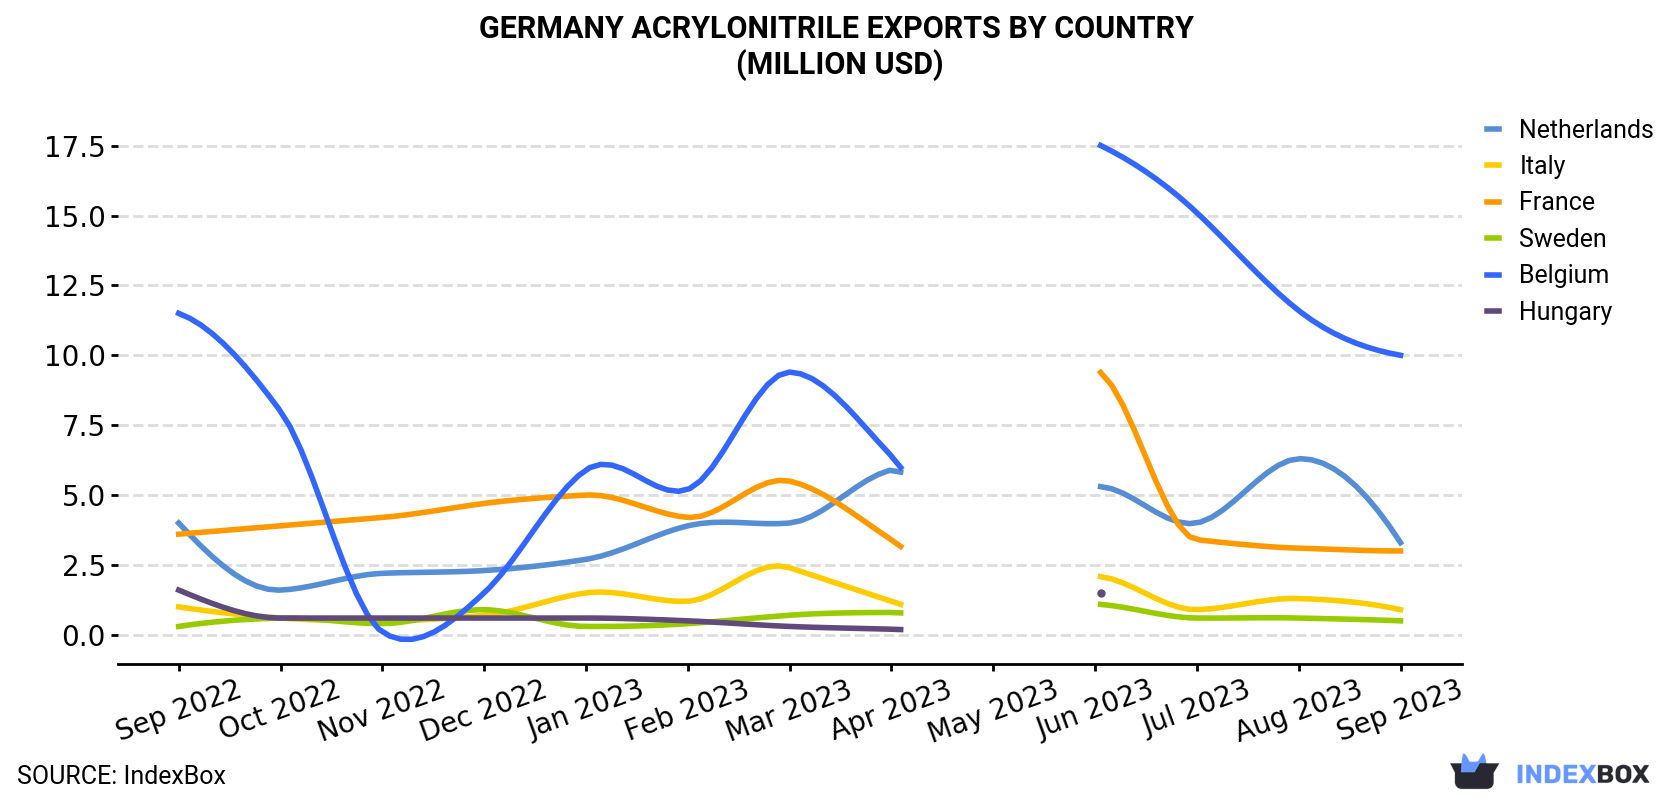 Germany Acrylonitrile Exports By Country (Million USD)